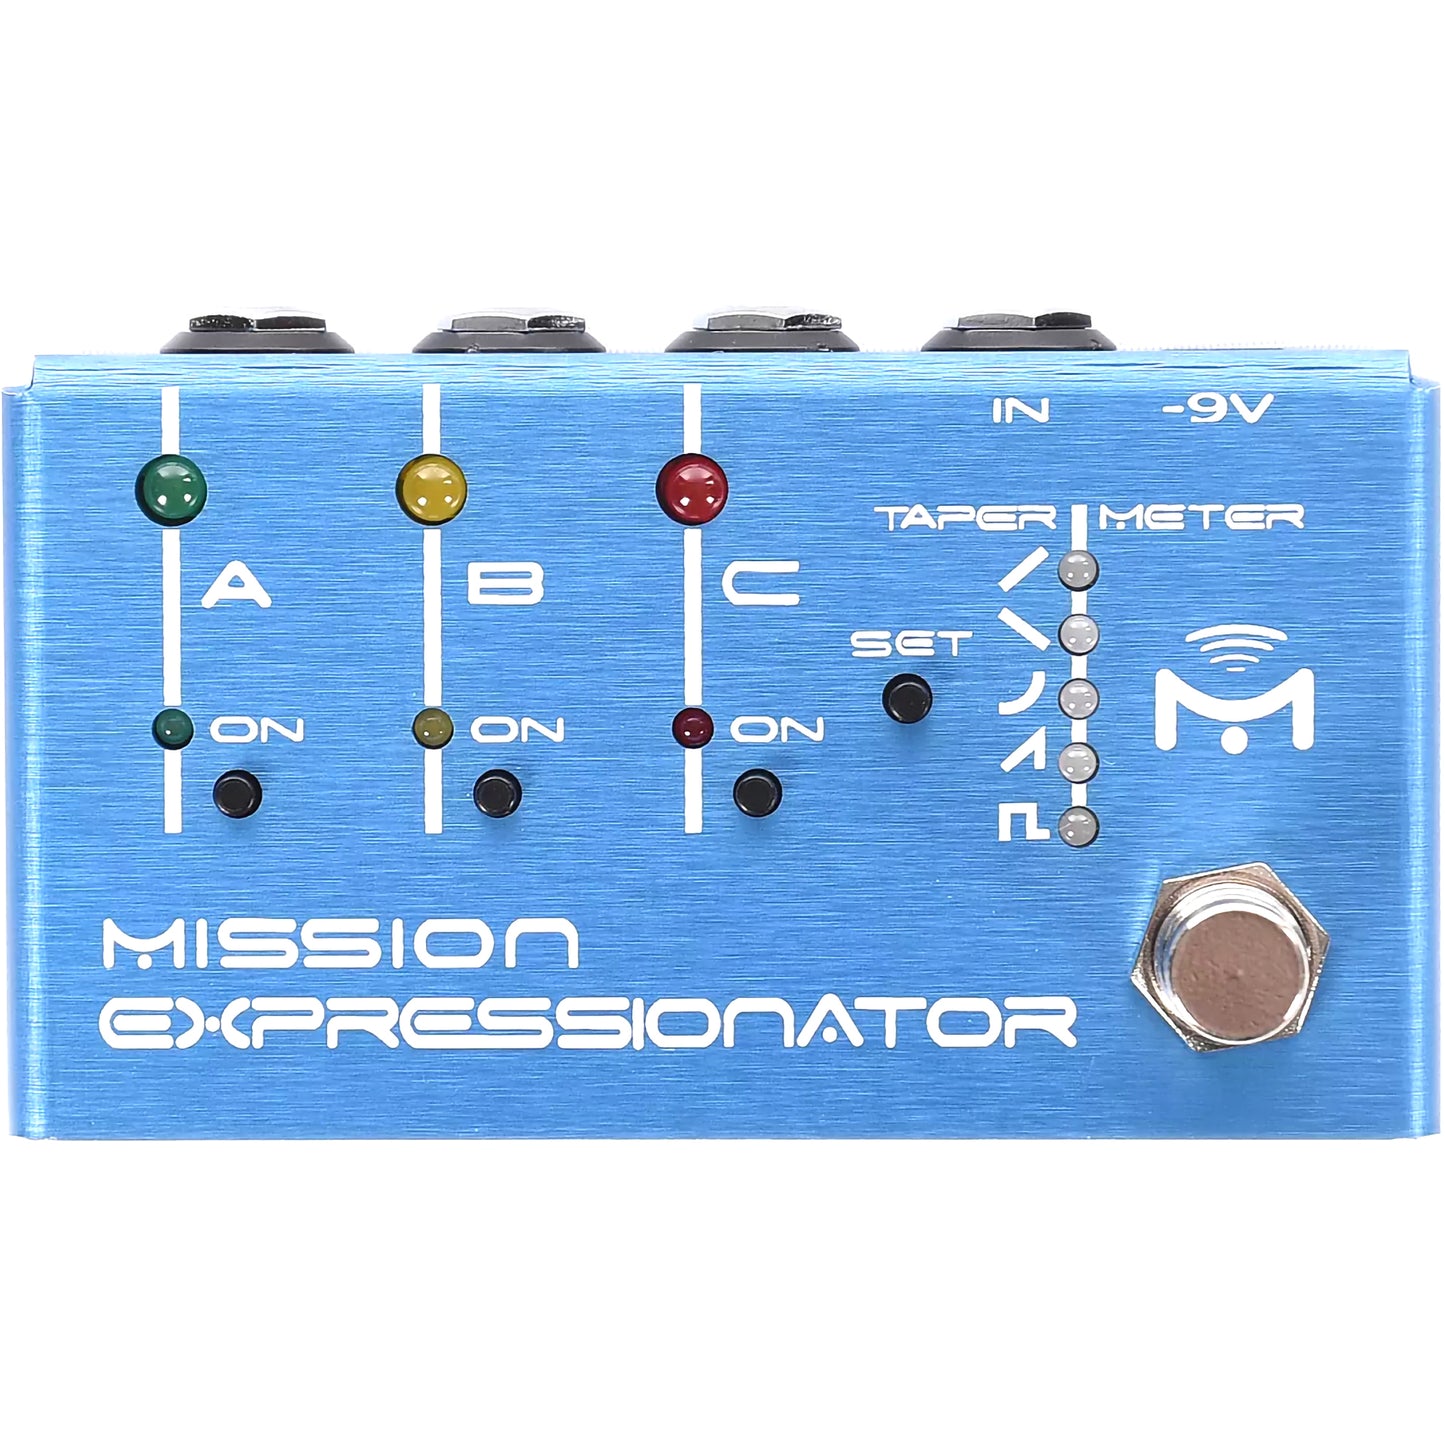 Mission Engineering Expressionator Multi-Expression Controller